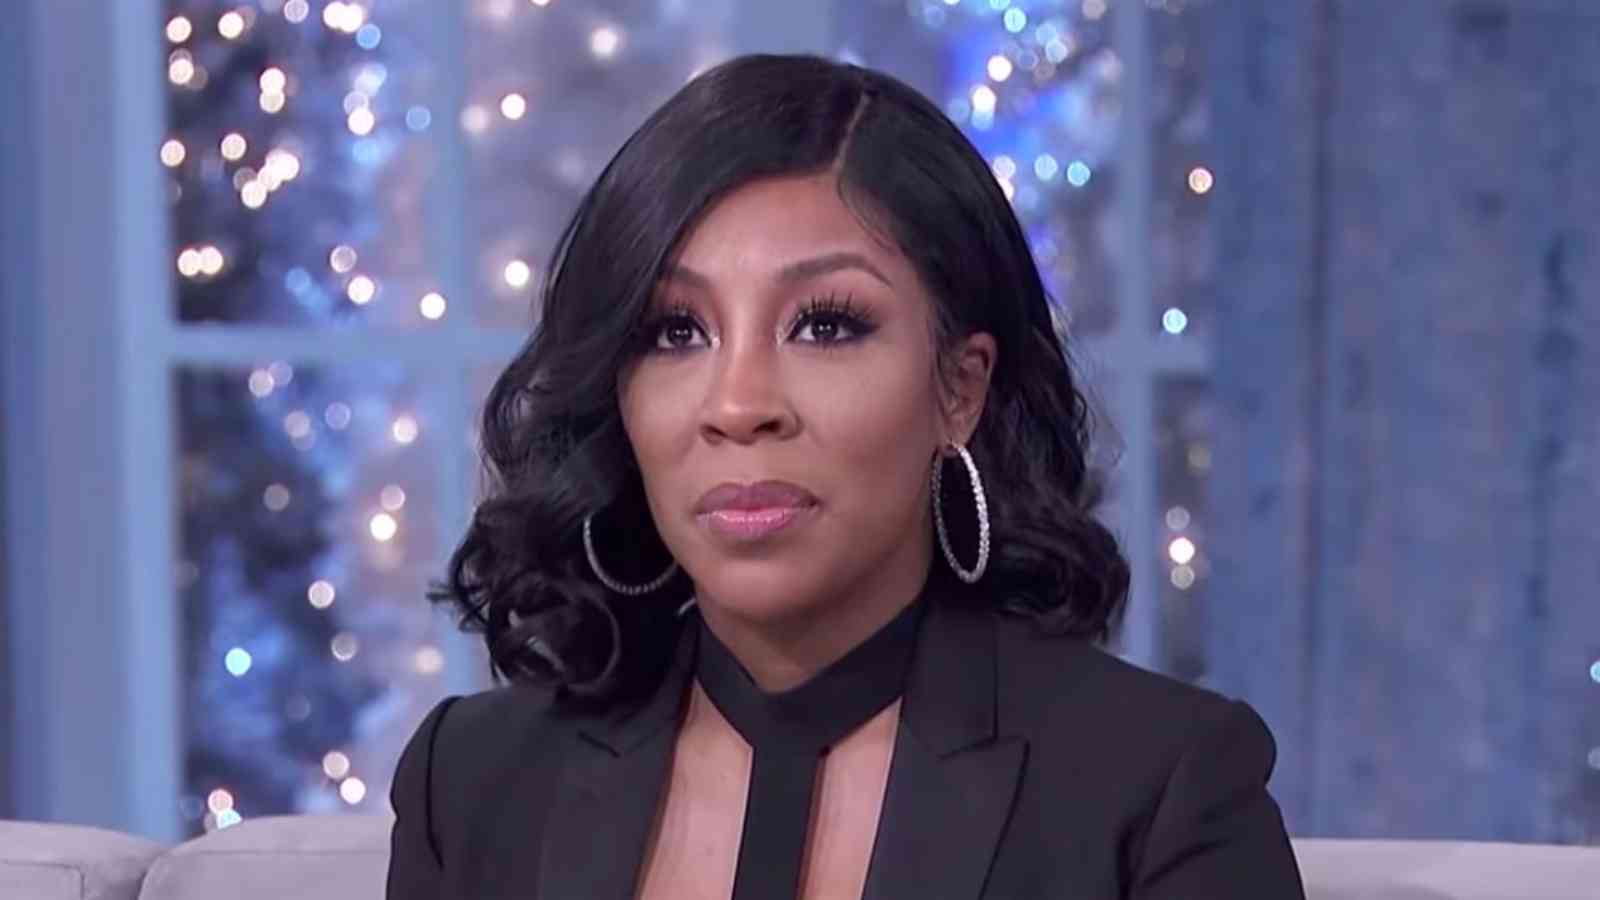 K. Michelle Biography: Age, Height, Birthday, Family, Net Worth